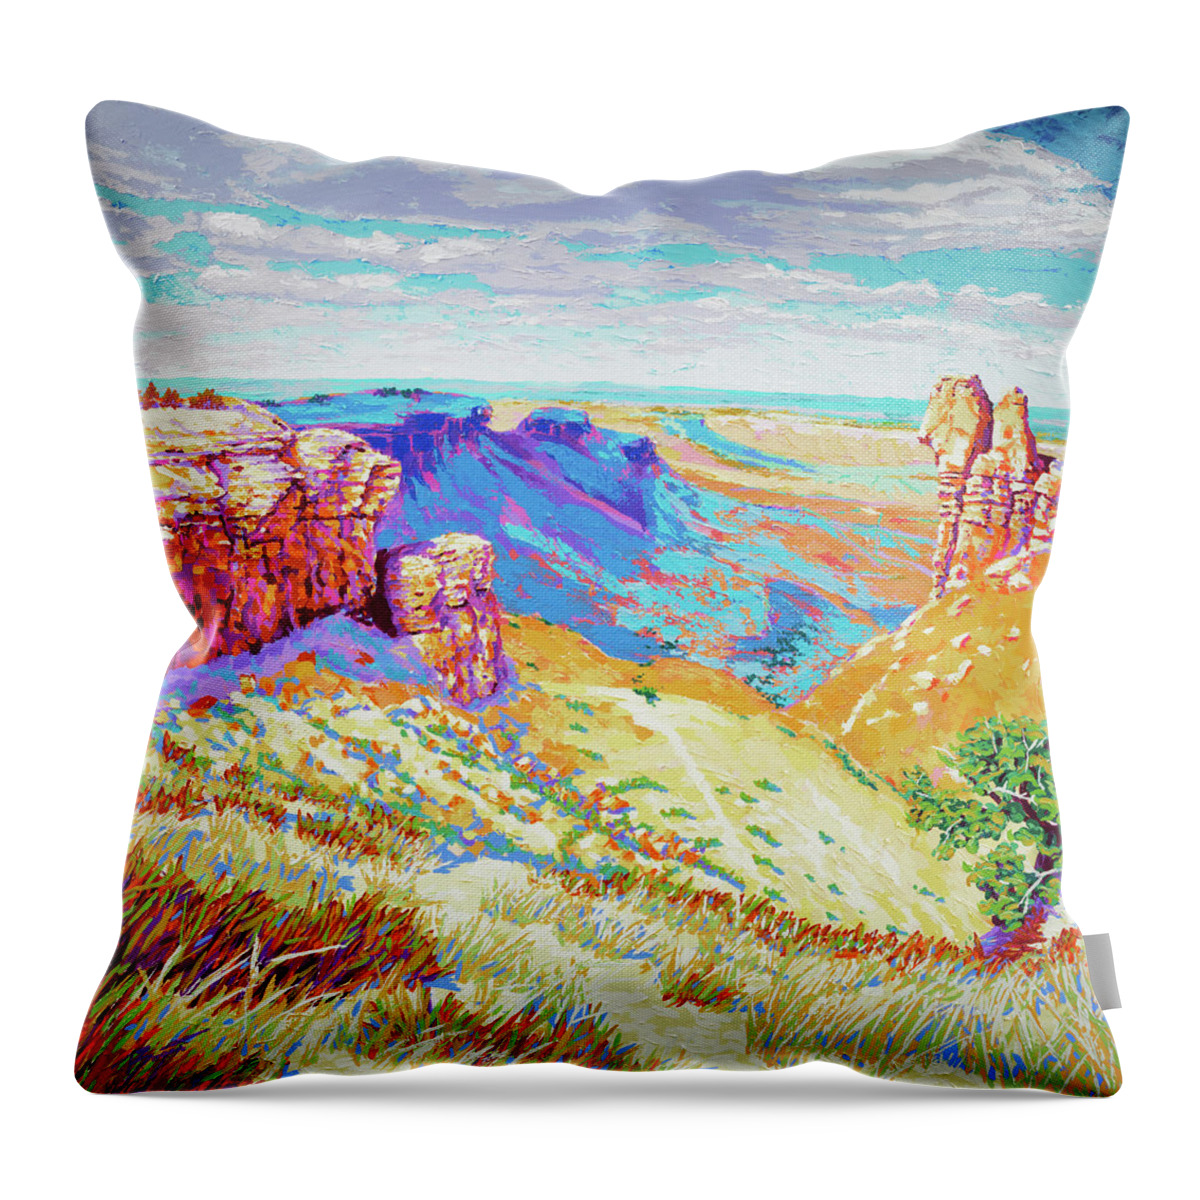 Impressionism Throw Pillow featuring the painting Keep Moving Forward by Darien Bogart